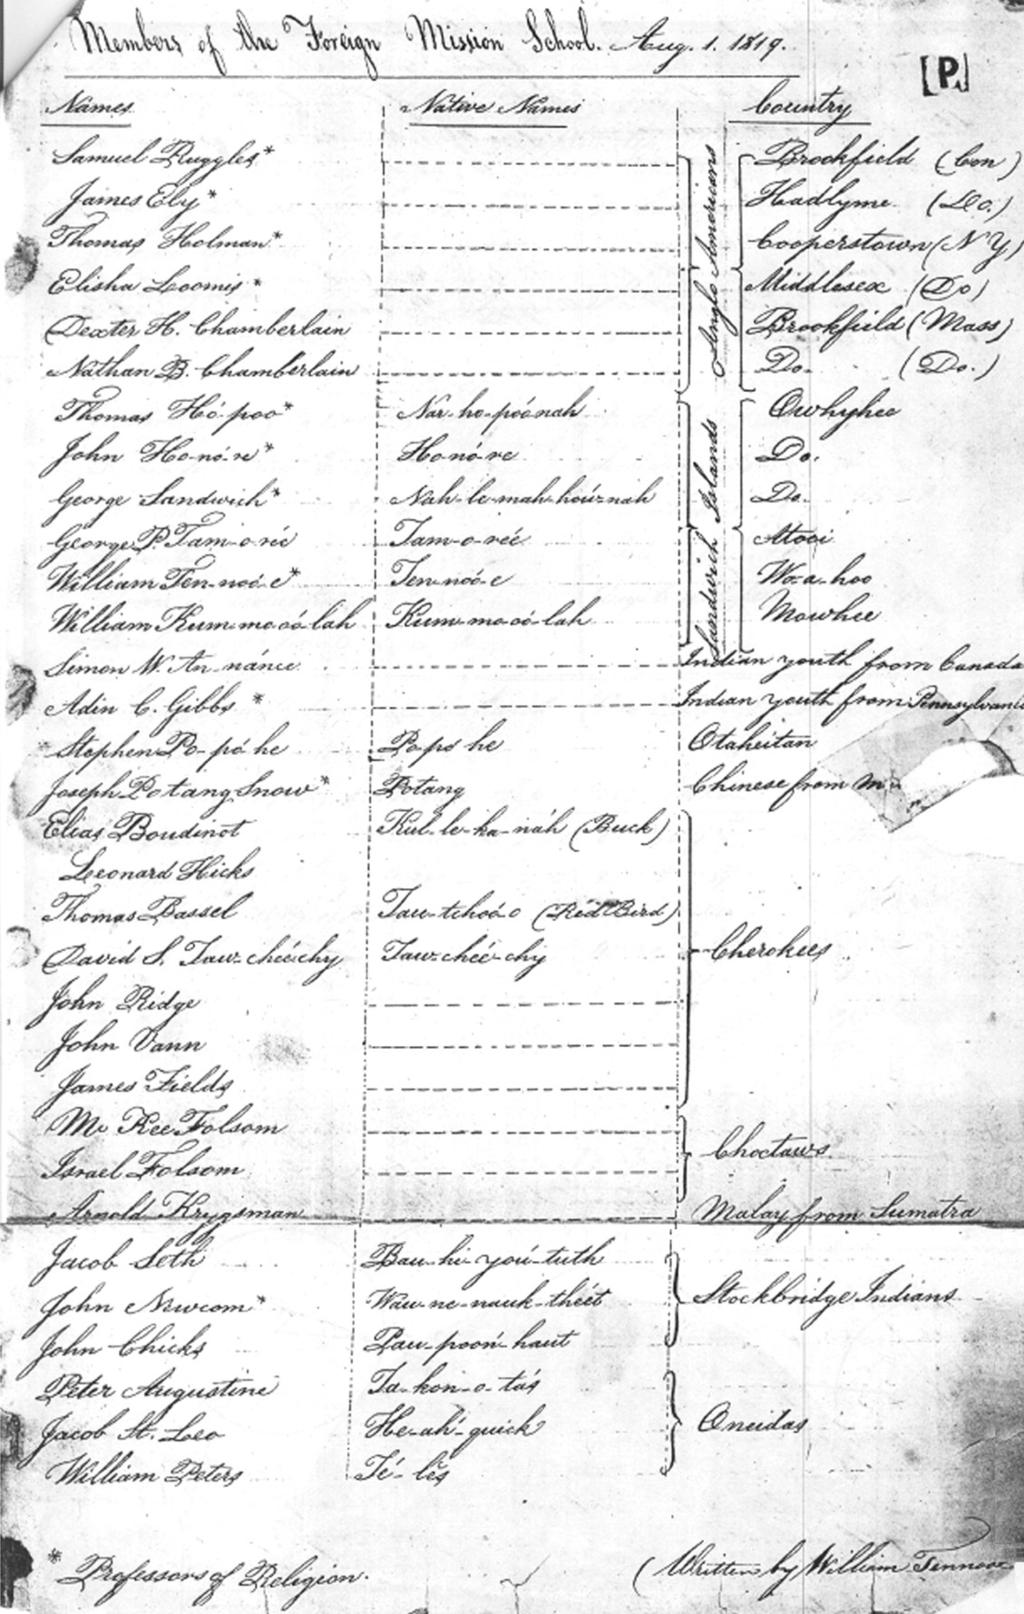 Roster of the Foreign Mission School dated Aug. 1, 1819, handwritten by William Tennooe.